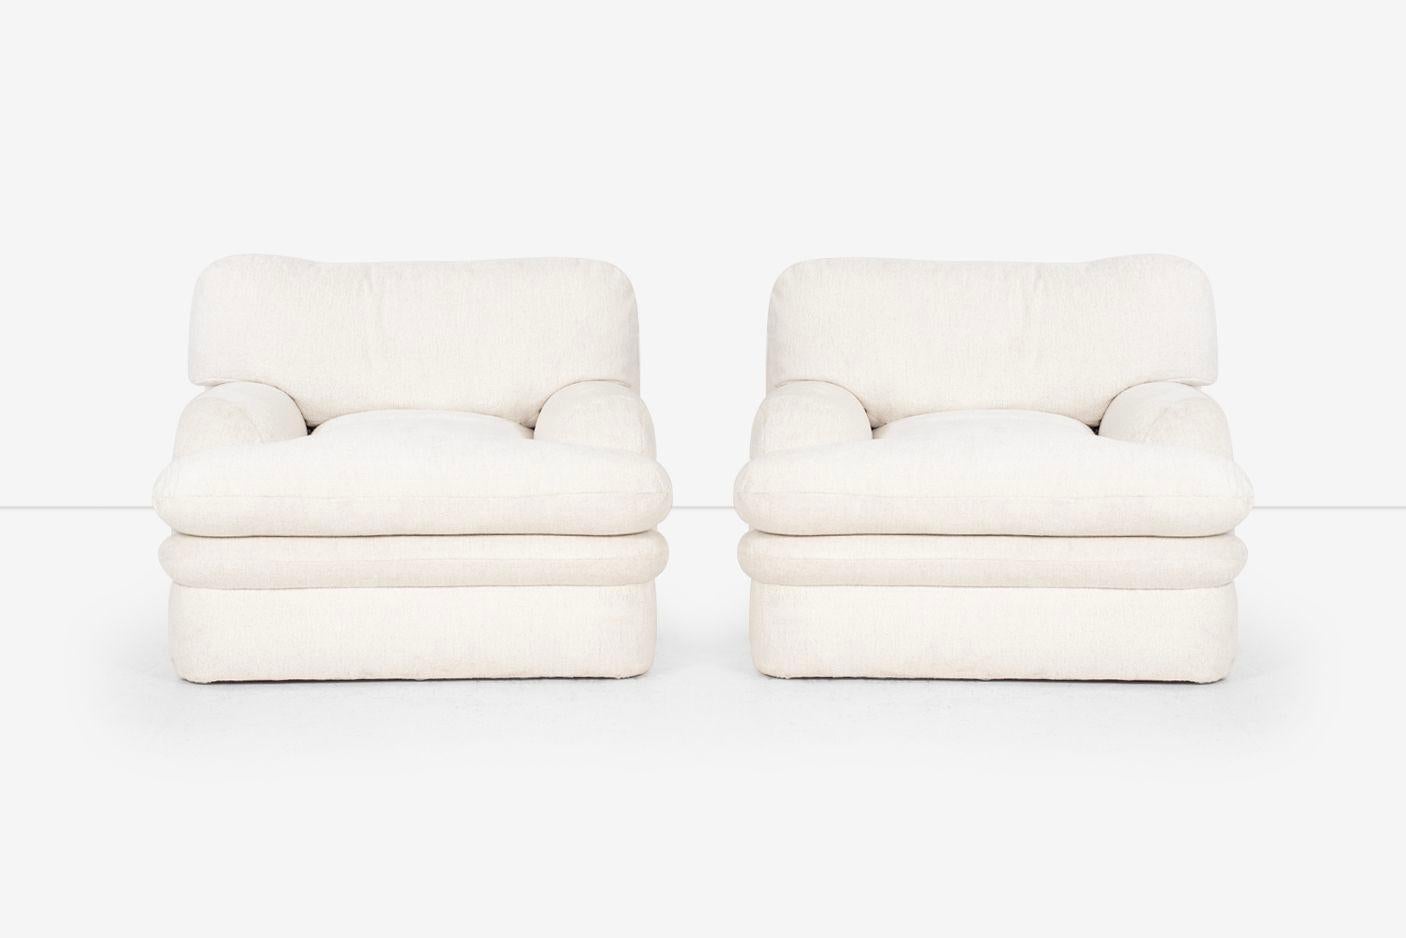 Pair of Steven Chase Oversized Lounges from Palm Springs Commission, Reupholstered with cotton fabric, seat and back pillows down filled

Dimensions:
28.50